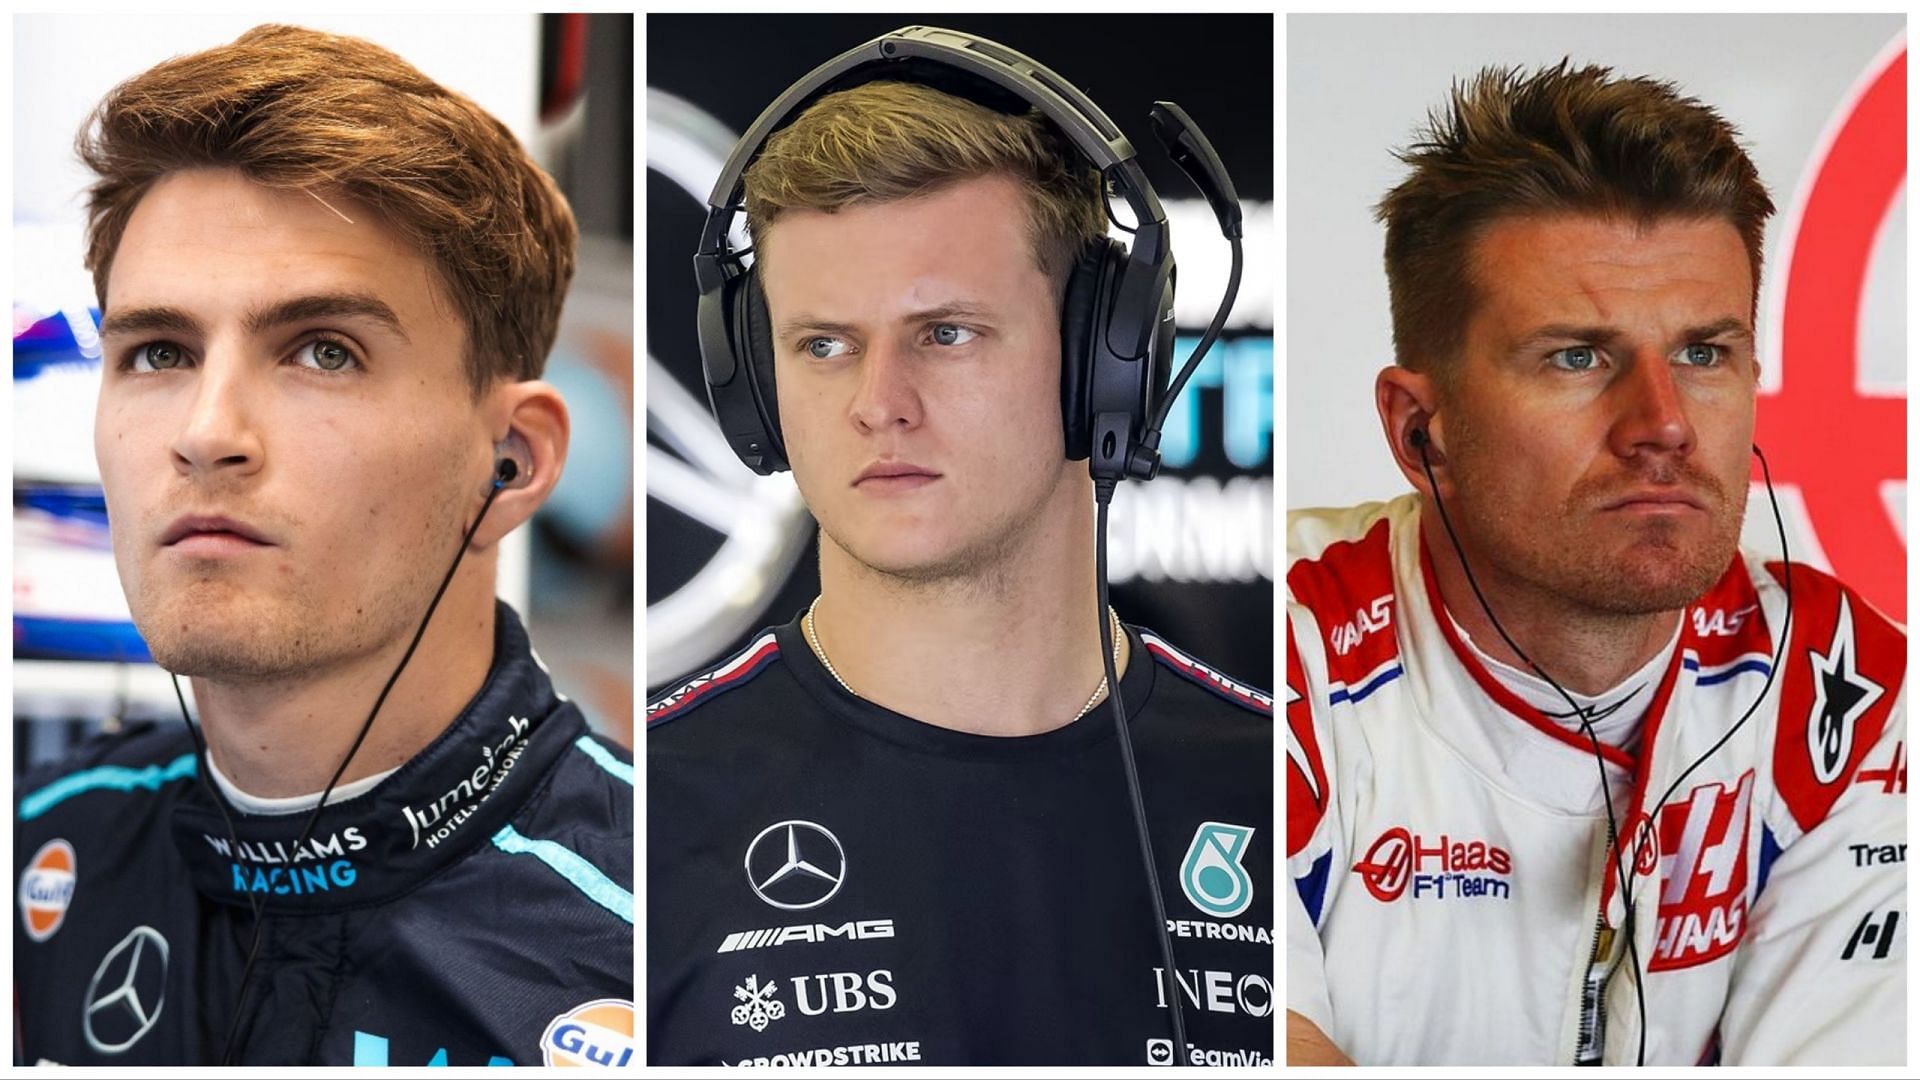 Who are the potential drivers for Andretti